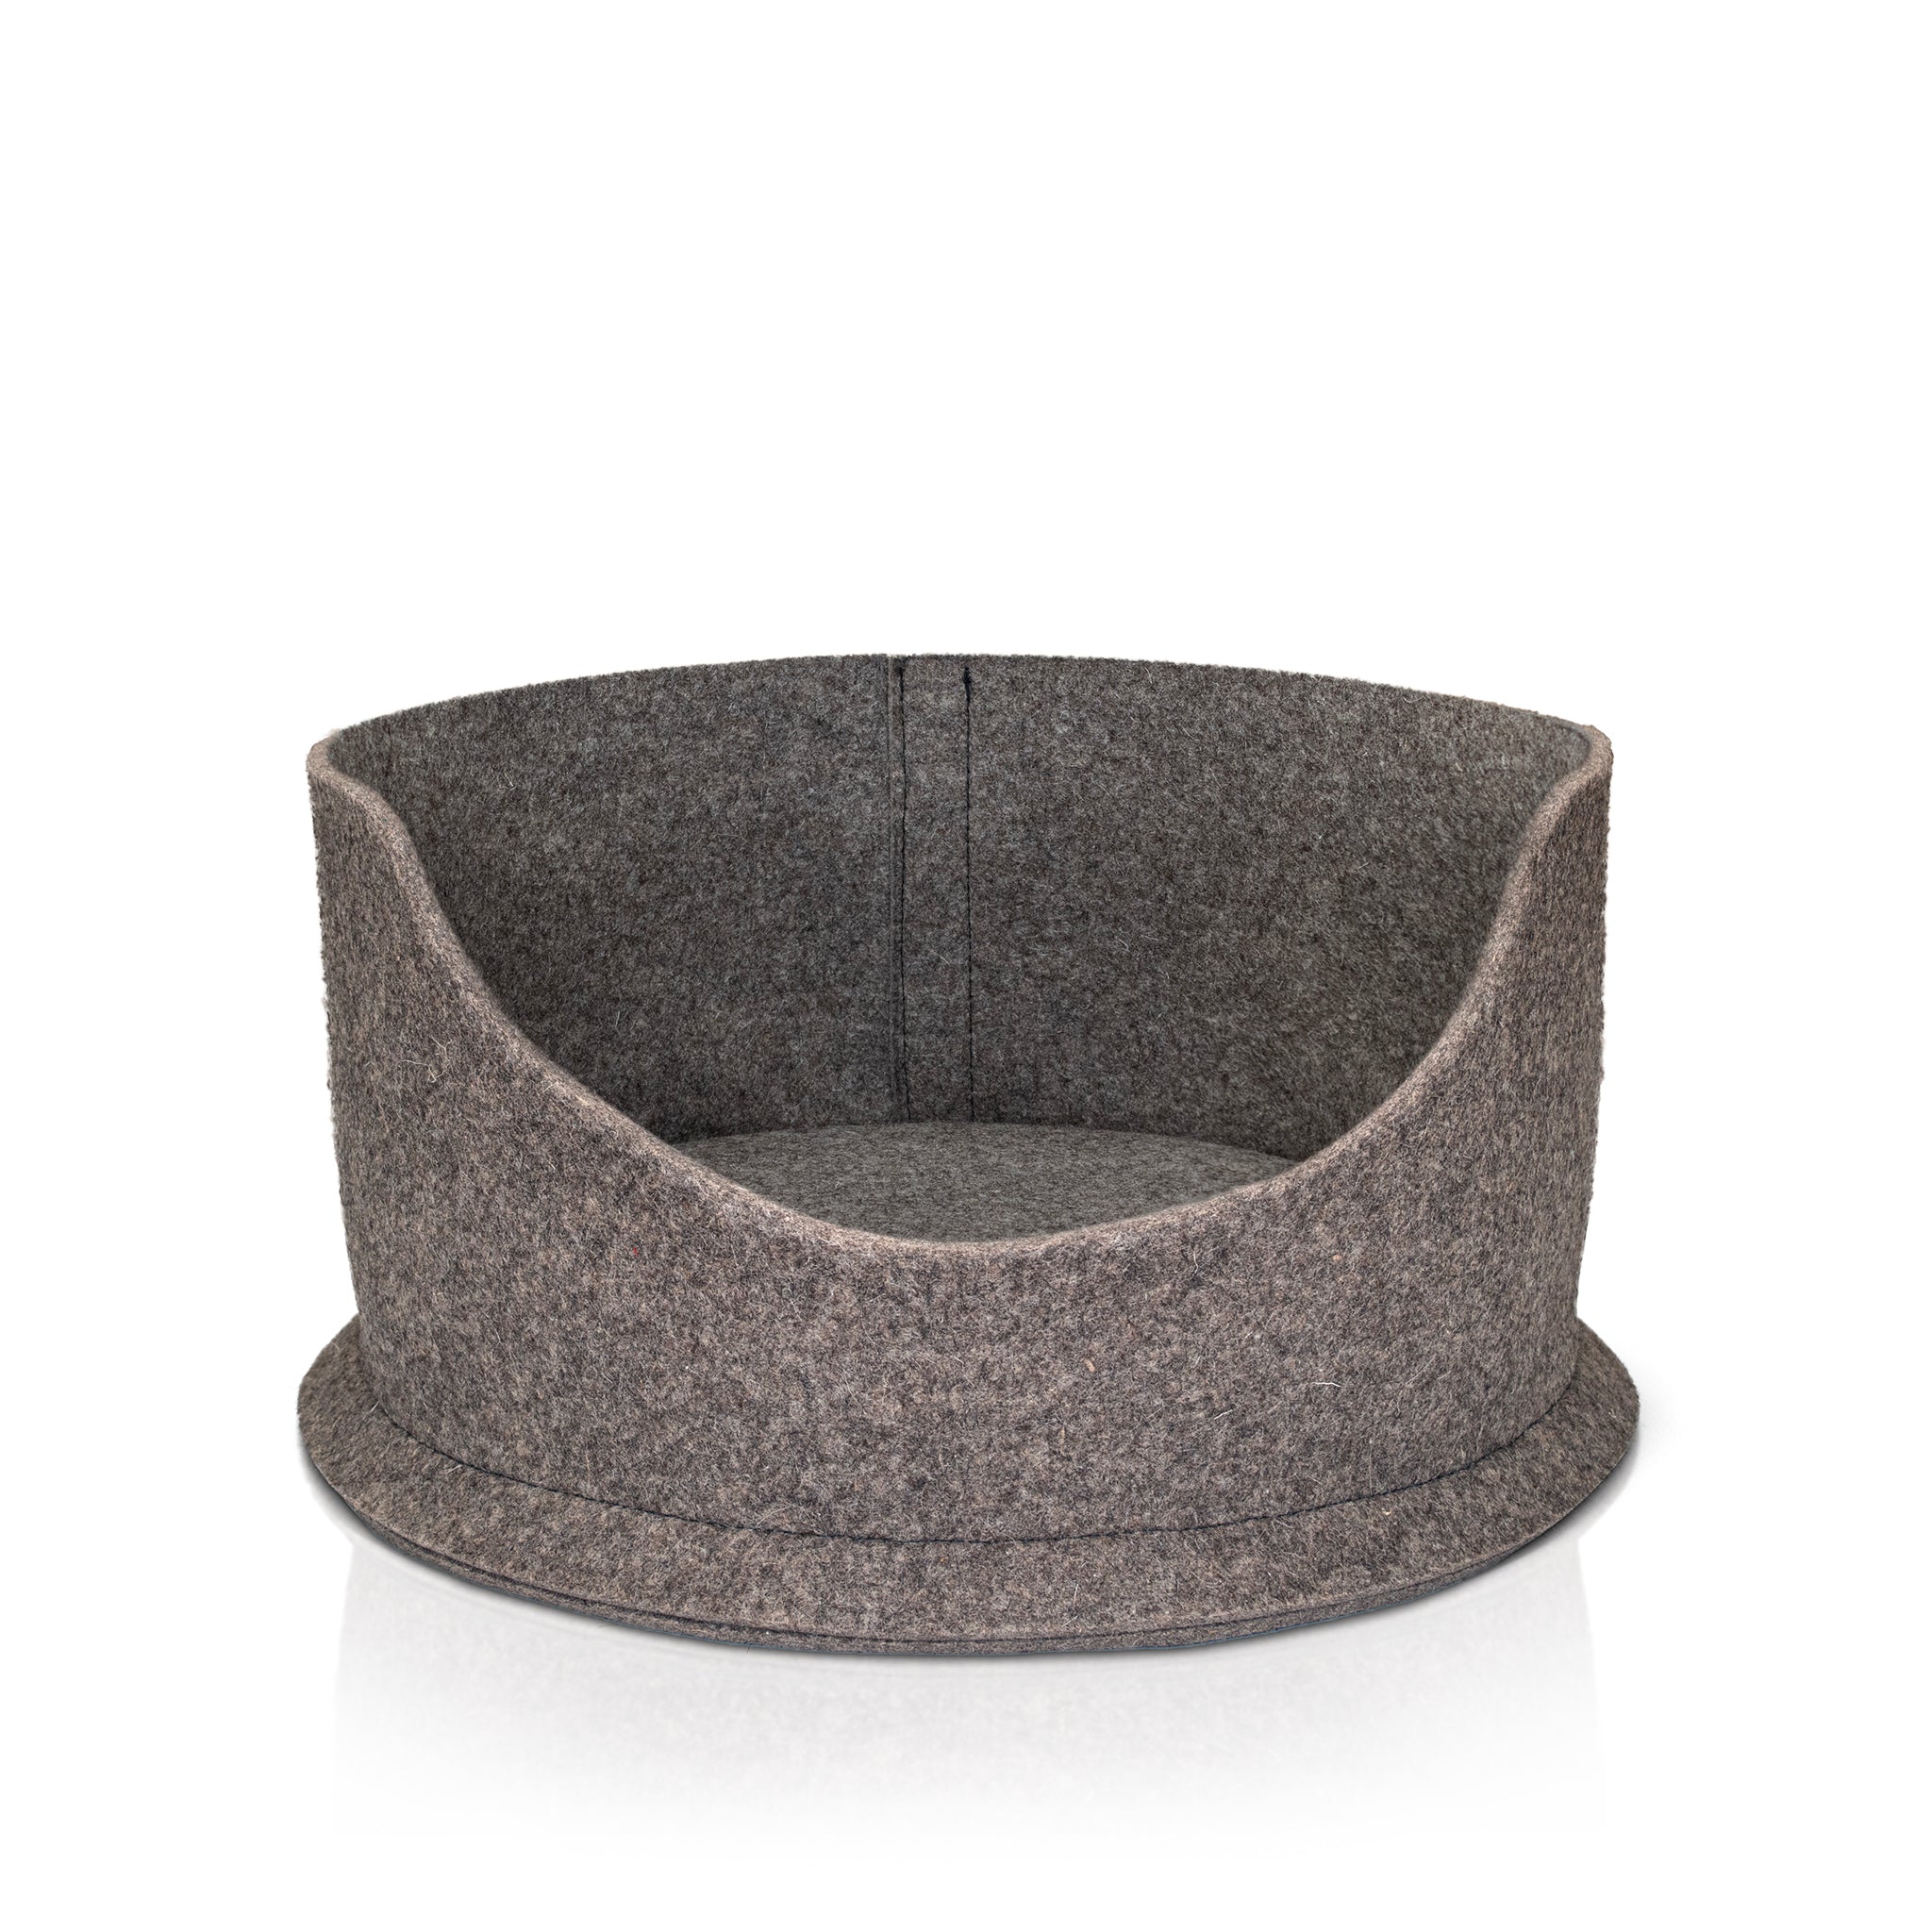 A Chimney Sheep small PetSnug Cat Bed. This is a wool felt cat cozy bed, made of 100% natural sheep's wool. It is plastic free and pet safe. The pet sis upon a white background. It is 3D circular in shape with a dip in the centre to allow easy access for cats.